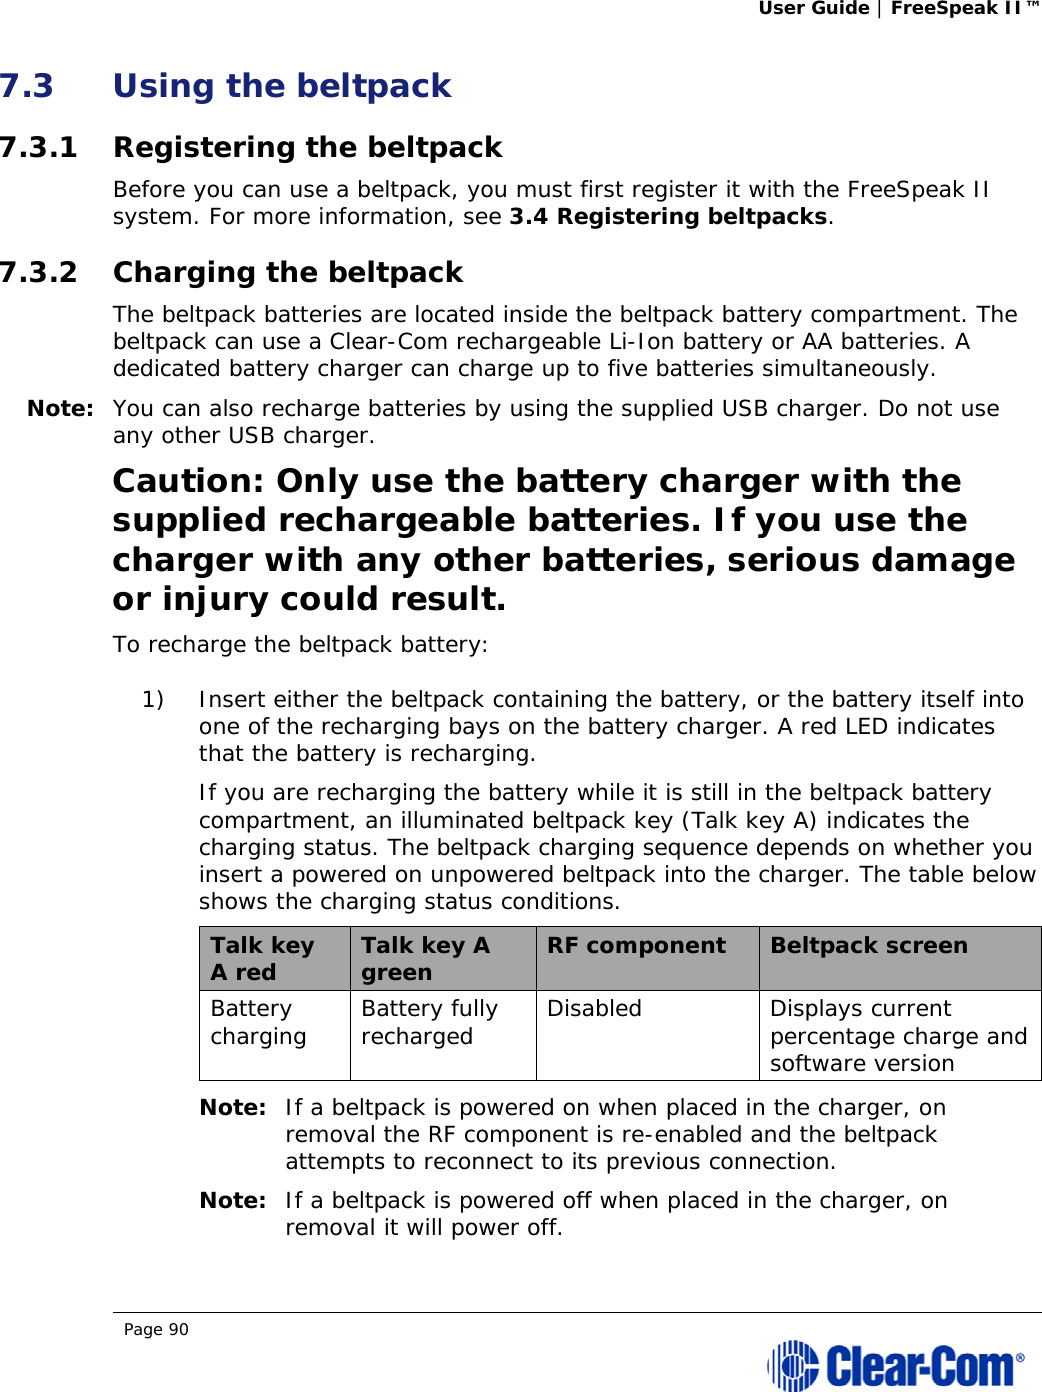 User Guide | FreeSpeak II™  Page 90  7.3 Using the beltpack 7.3.1 Registering the beltpack Before you can use a beltpack, you must first register it with the FreeSpeak II system. For more information, see 3.4 Registering beltpacks. 7.3.2 Charging the beltpack The beltpack batteries are located inside the beltpack battery compartment. The beltpack can use a Clear-Com rechargeable Li-Ion battery or AA batteries. A dedicated battery charger can charge up to five batteries simultaneously. Note: You can also recharge batteries by using the supplied USB charger. Do not use any other USB charger. Caution: Only use the battery charger with the supplied rechargeable batteries. If you use the charger with any other batteries, serious damage or injury could result. To recharge the beltpack battery: 1) Insert either the beltpack containing the battery, or the battery itself into one of the recharging bays on the battery charger. A red LED indicates that the battery is recharging. If you are recharging the battery while it is still in the beltpack battery compartment, an illuminated beltpack key (Talk key A) indicates the charging status. The beltpack charging sequence depends on whether you insert a powered on unpowered beltpack into the charger. The table below shows the charging status conditions. Talk key A red  Talk key A green  RF component  Beltpack screen Battery charging  Battery fully recharged  Disabled Displays current percentage charge and software version Note: If a beltpack is powered on when placed in the charger, on removal the RF component is re-enabled and the beltpack attempts to reconnect to its previous connection. Note: If a beltpack is powered off when placed in the charger, on removal it will power off. 